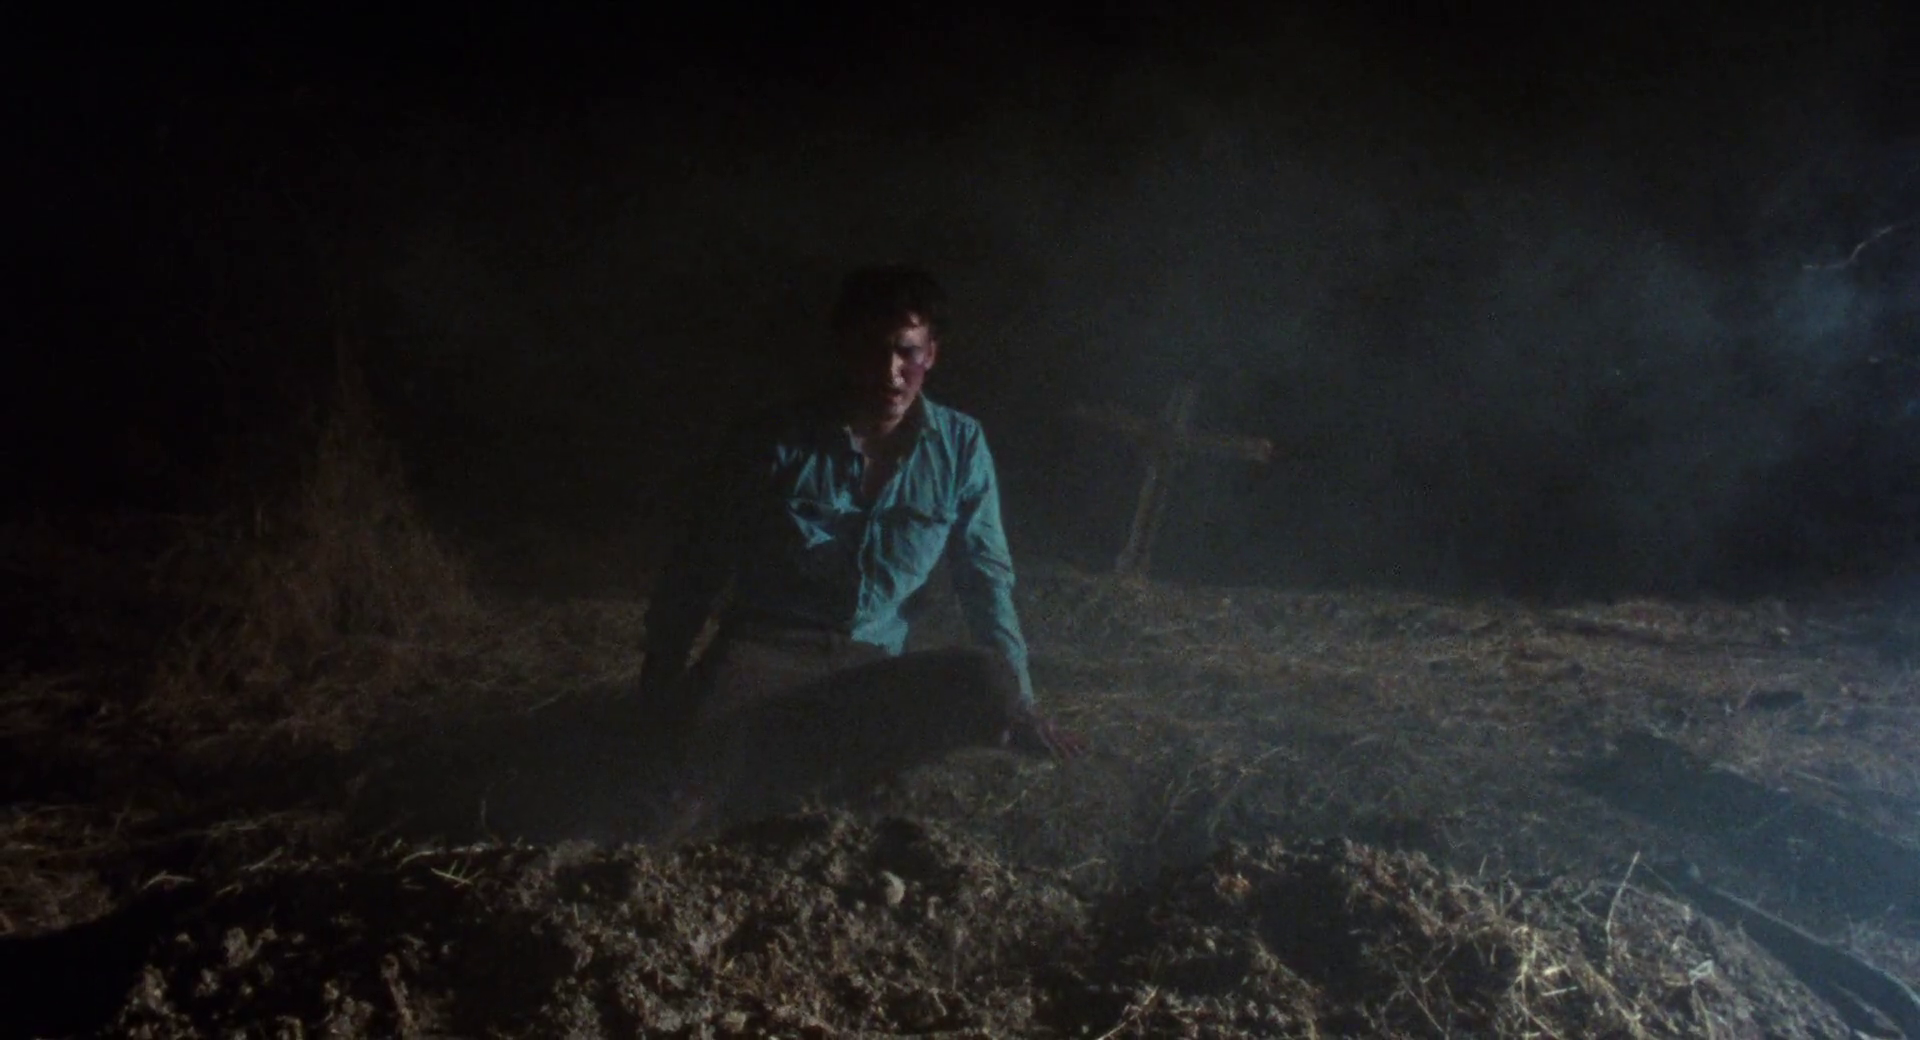 Fright Night Flicks at The Bend: The Evil Dead (1981 - NC17) - The